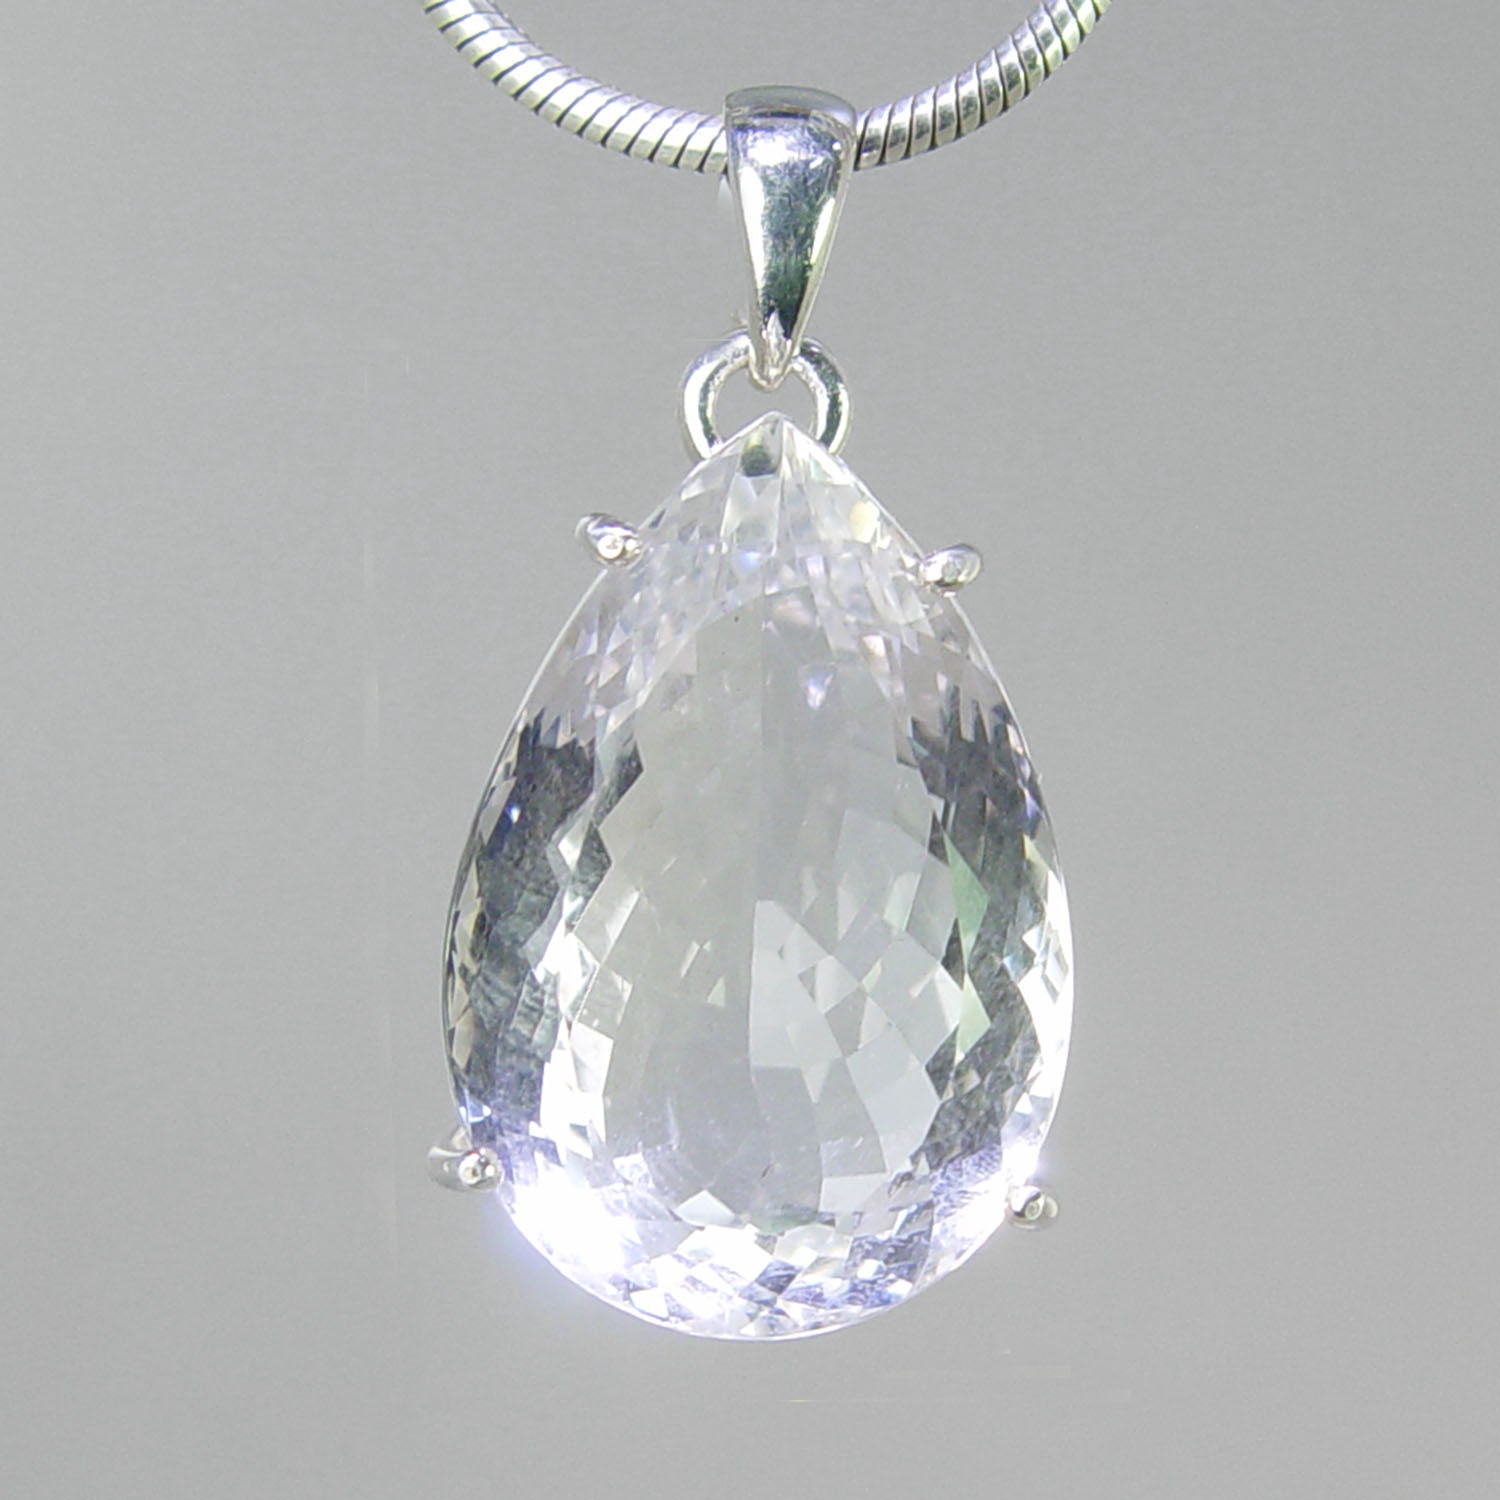 Crystal Quartz 35.7 ct Faceted Pear Shape Sterling Silver Pendant